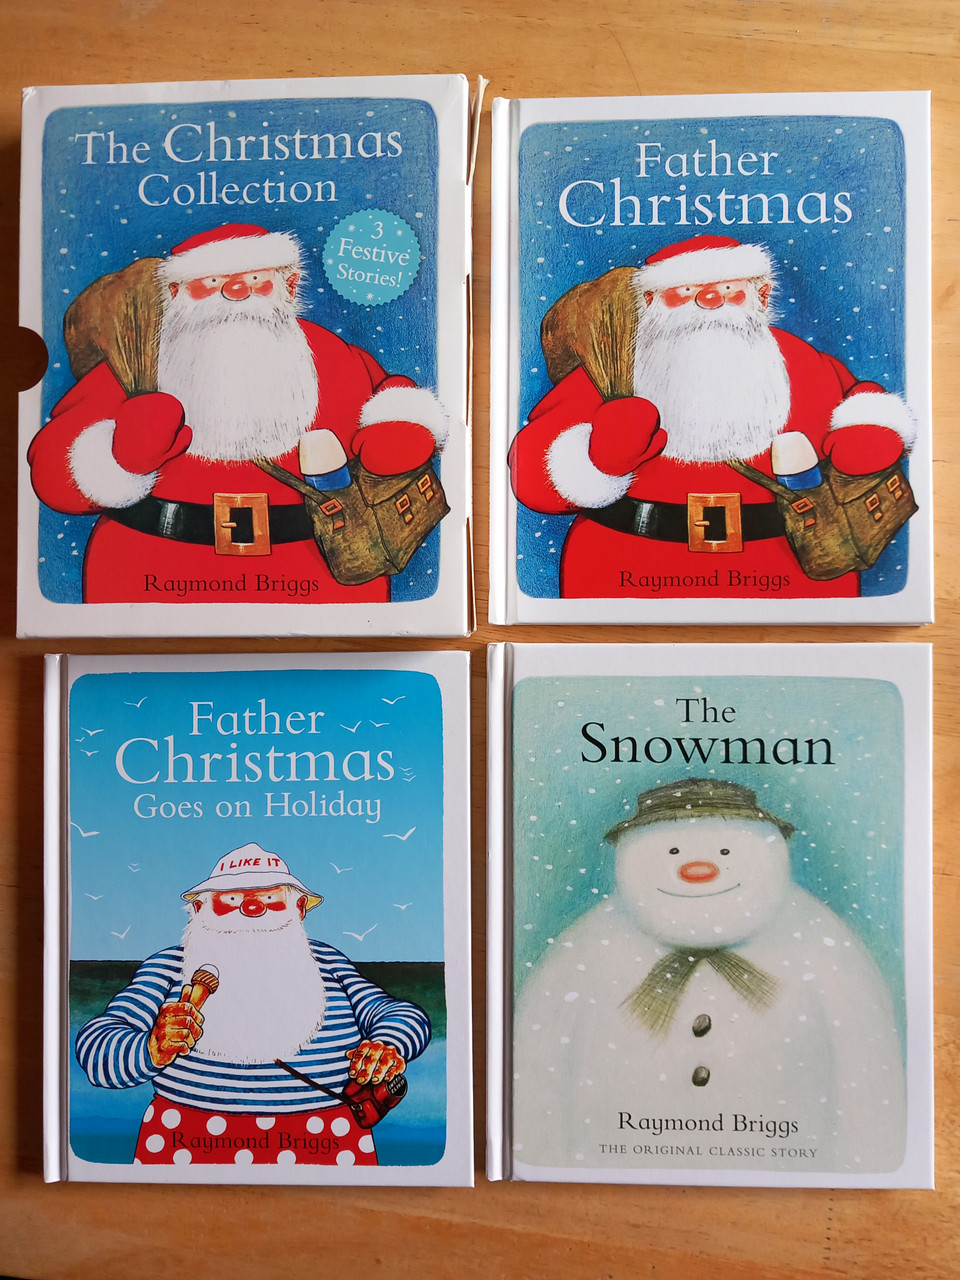 Raymond Briggs - The Christmas Collection (The Snowman / Father Christmas / Father Christmas Goes on Holiday ) Complete 3 Book Box Set)